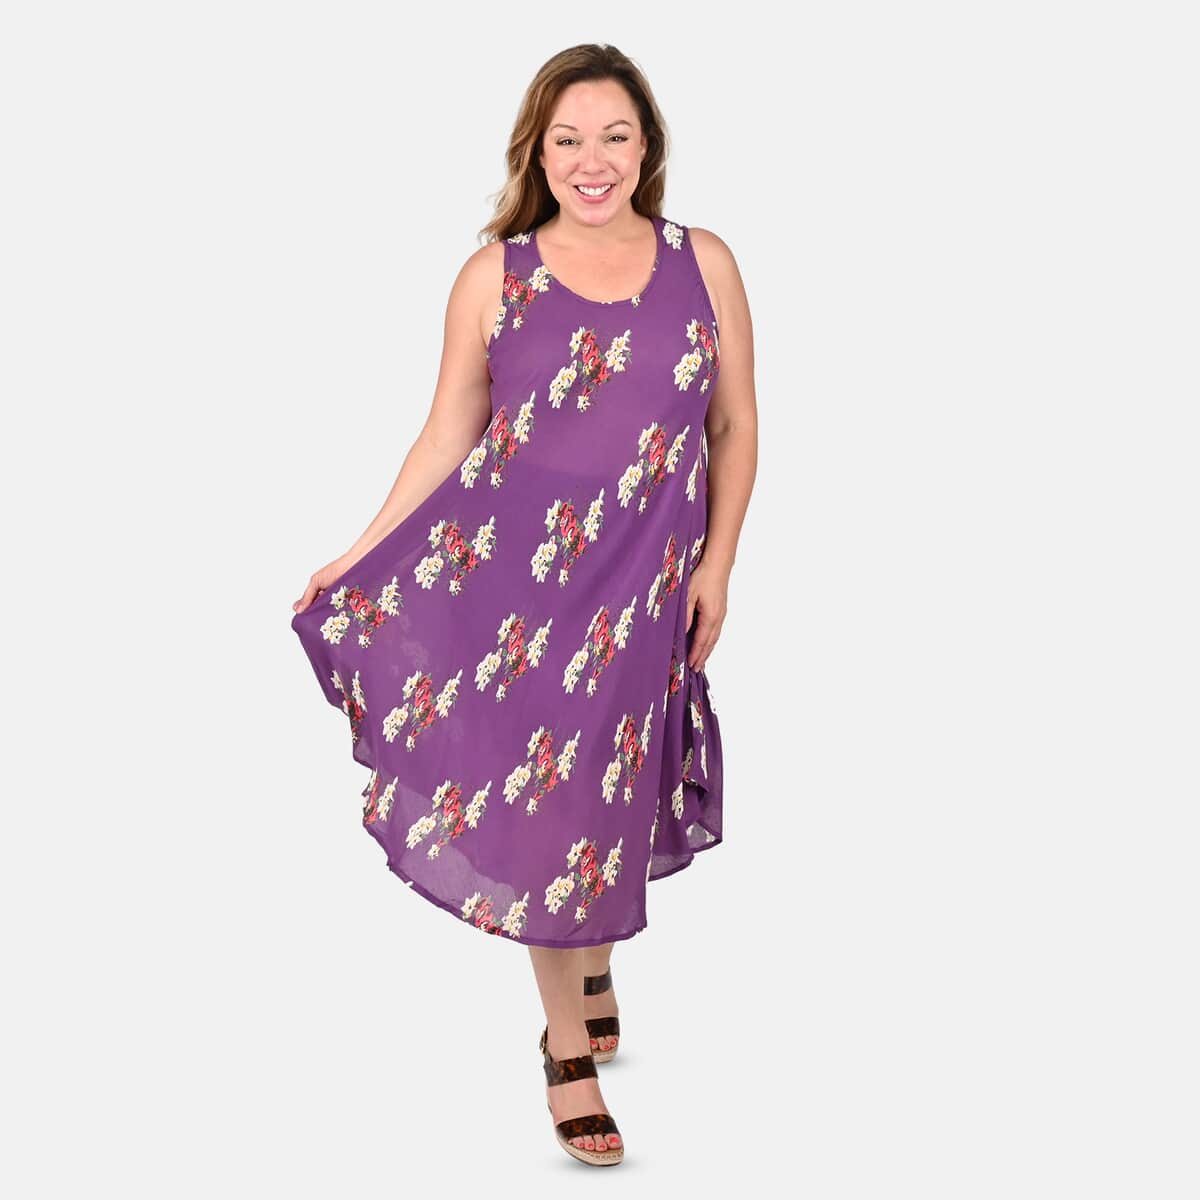 Tamsy Purple Women's Repeat Floral Print Umbrella Dress -One Size Missy image number 0